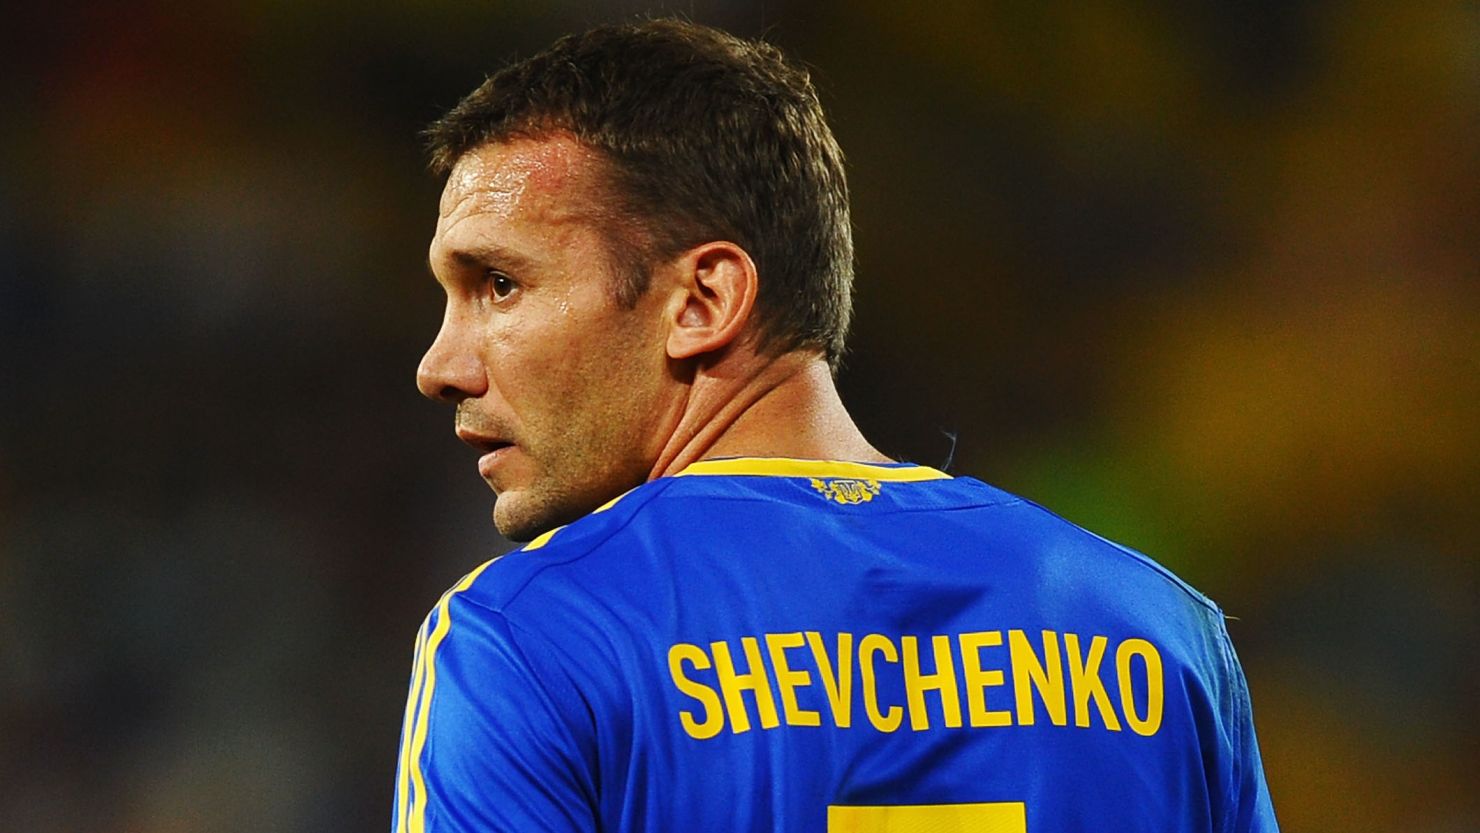 Andriy Shevchenko's last action as a player for Ukraine came at Euro 2012 in July